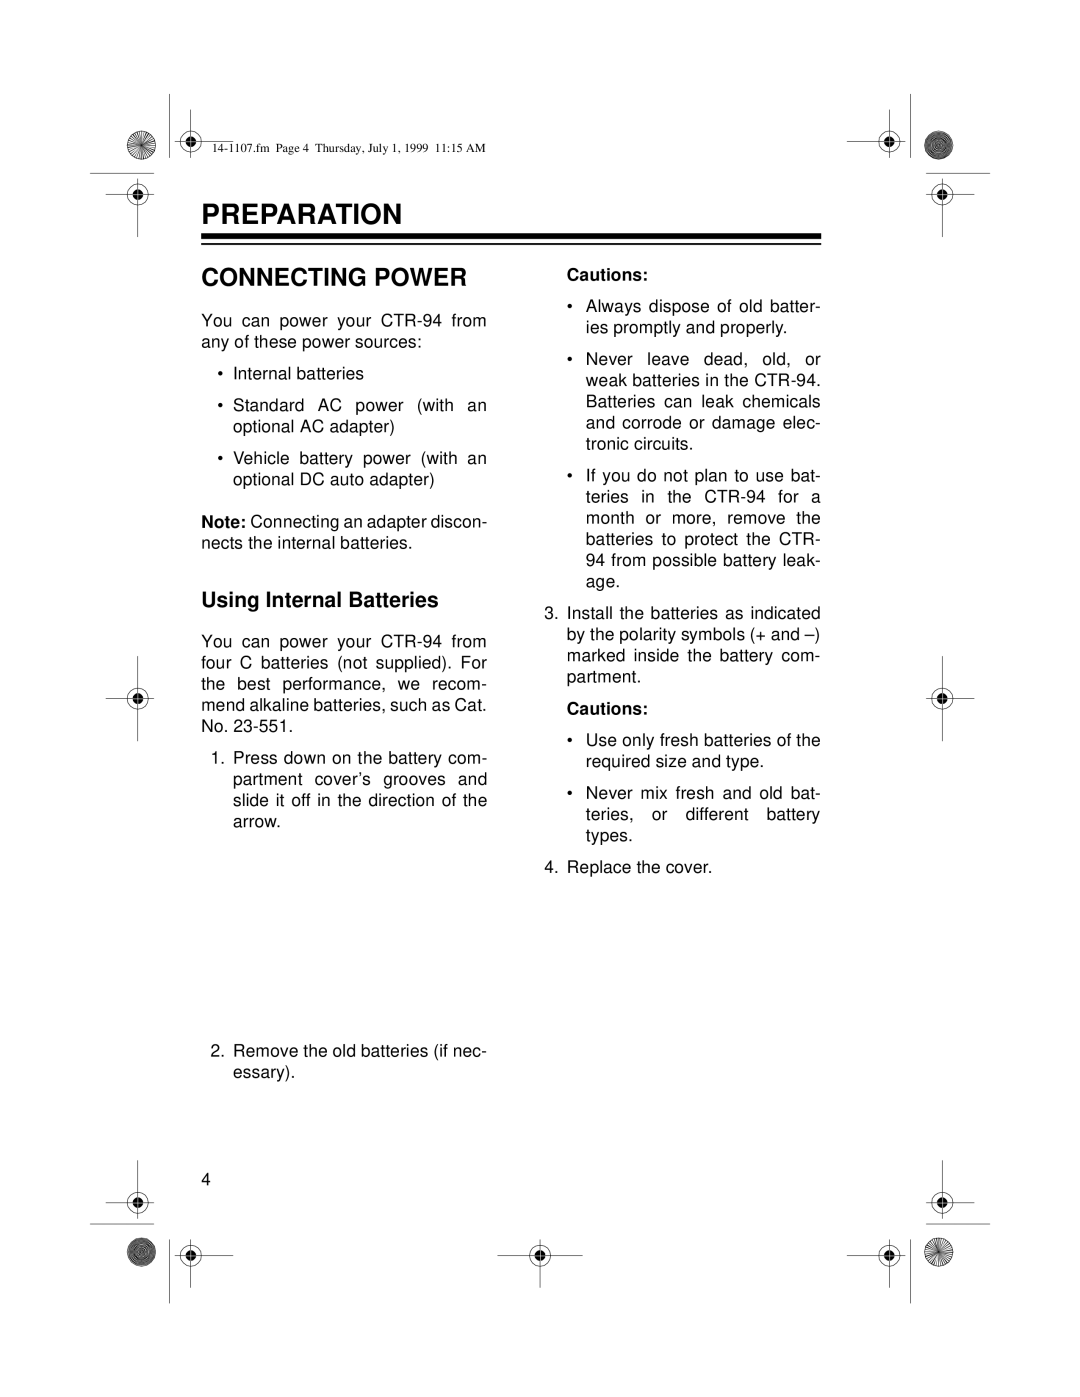 Radio Shack CTR-94, 14-1107A owner manual Preparation, Connecting Power, Using Internal Batteries 